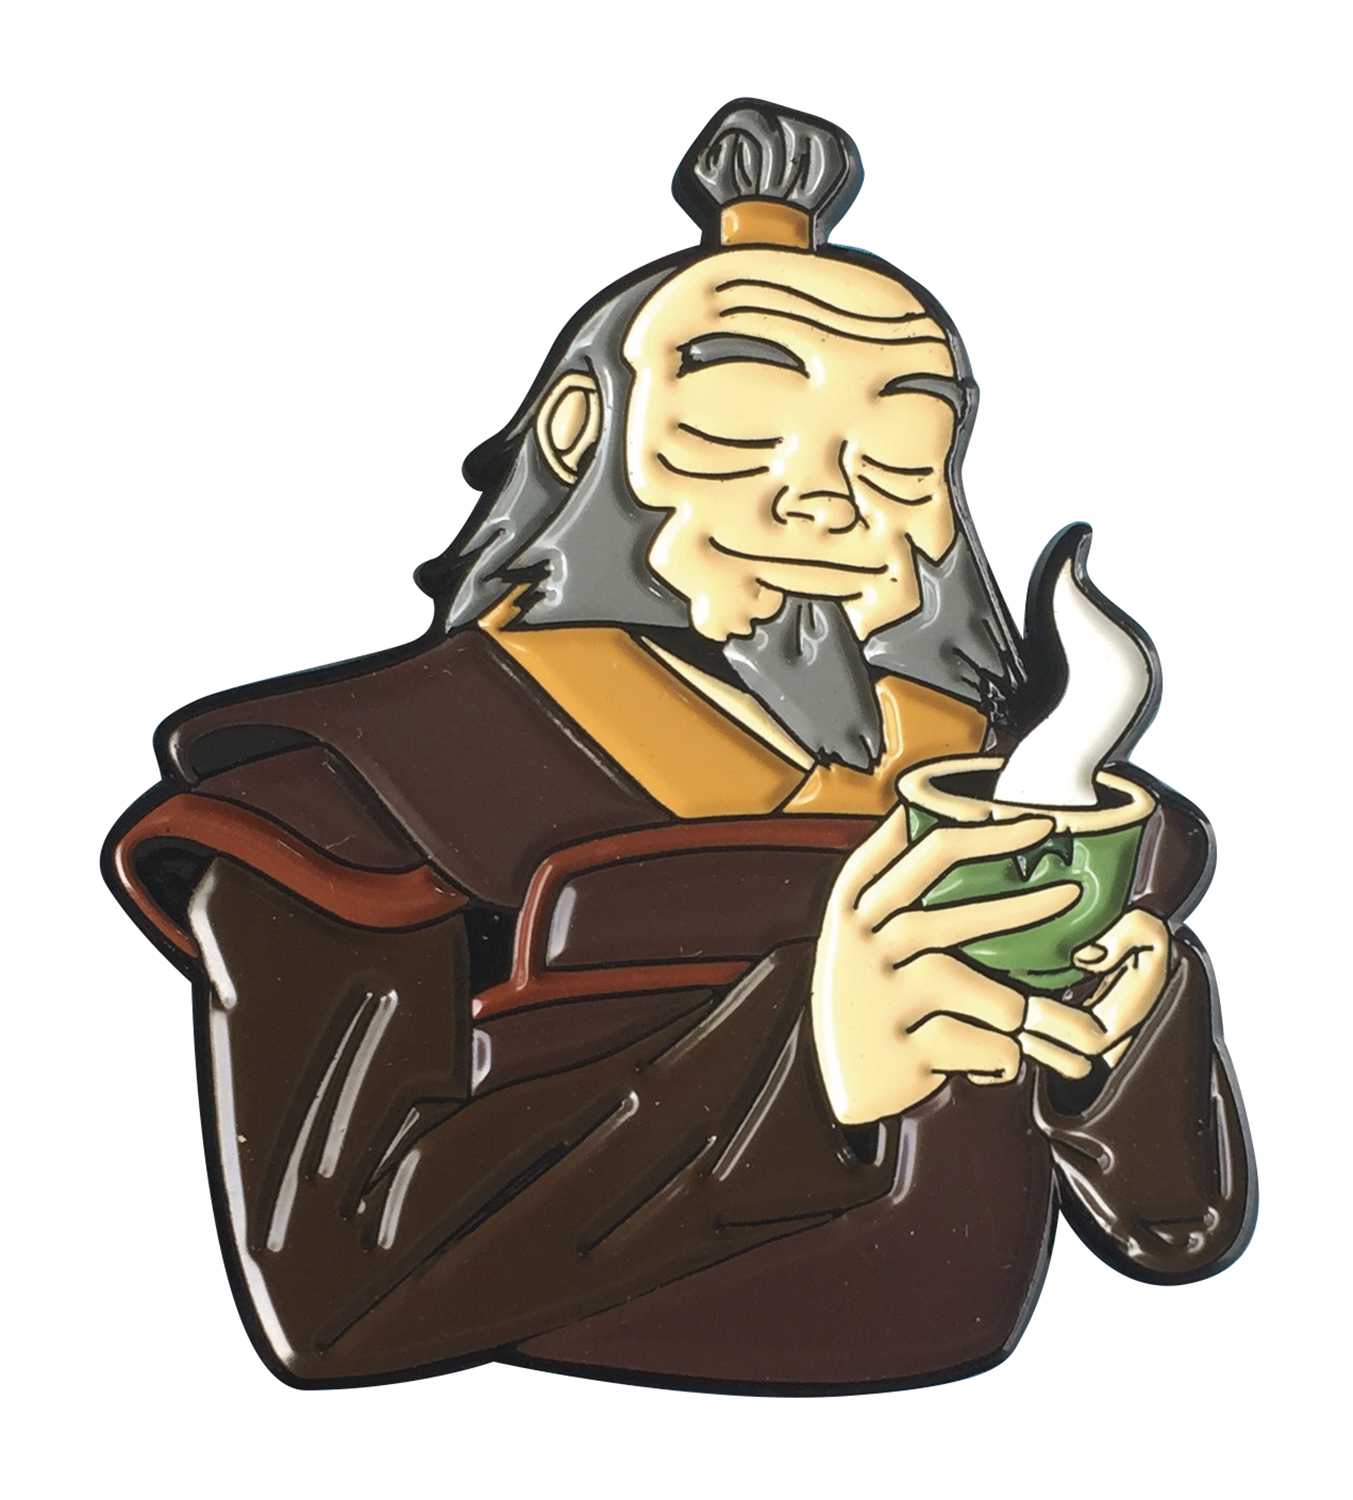 A good man, living under a tyrannical nation, Iroh does his best to teach h...